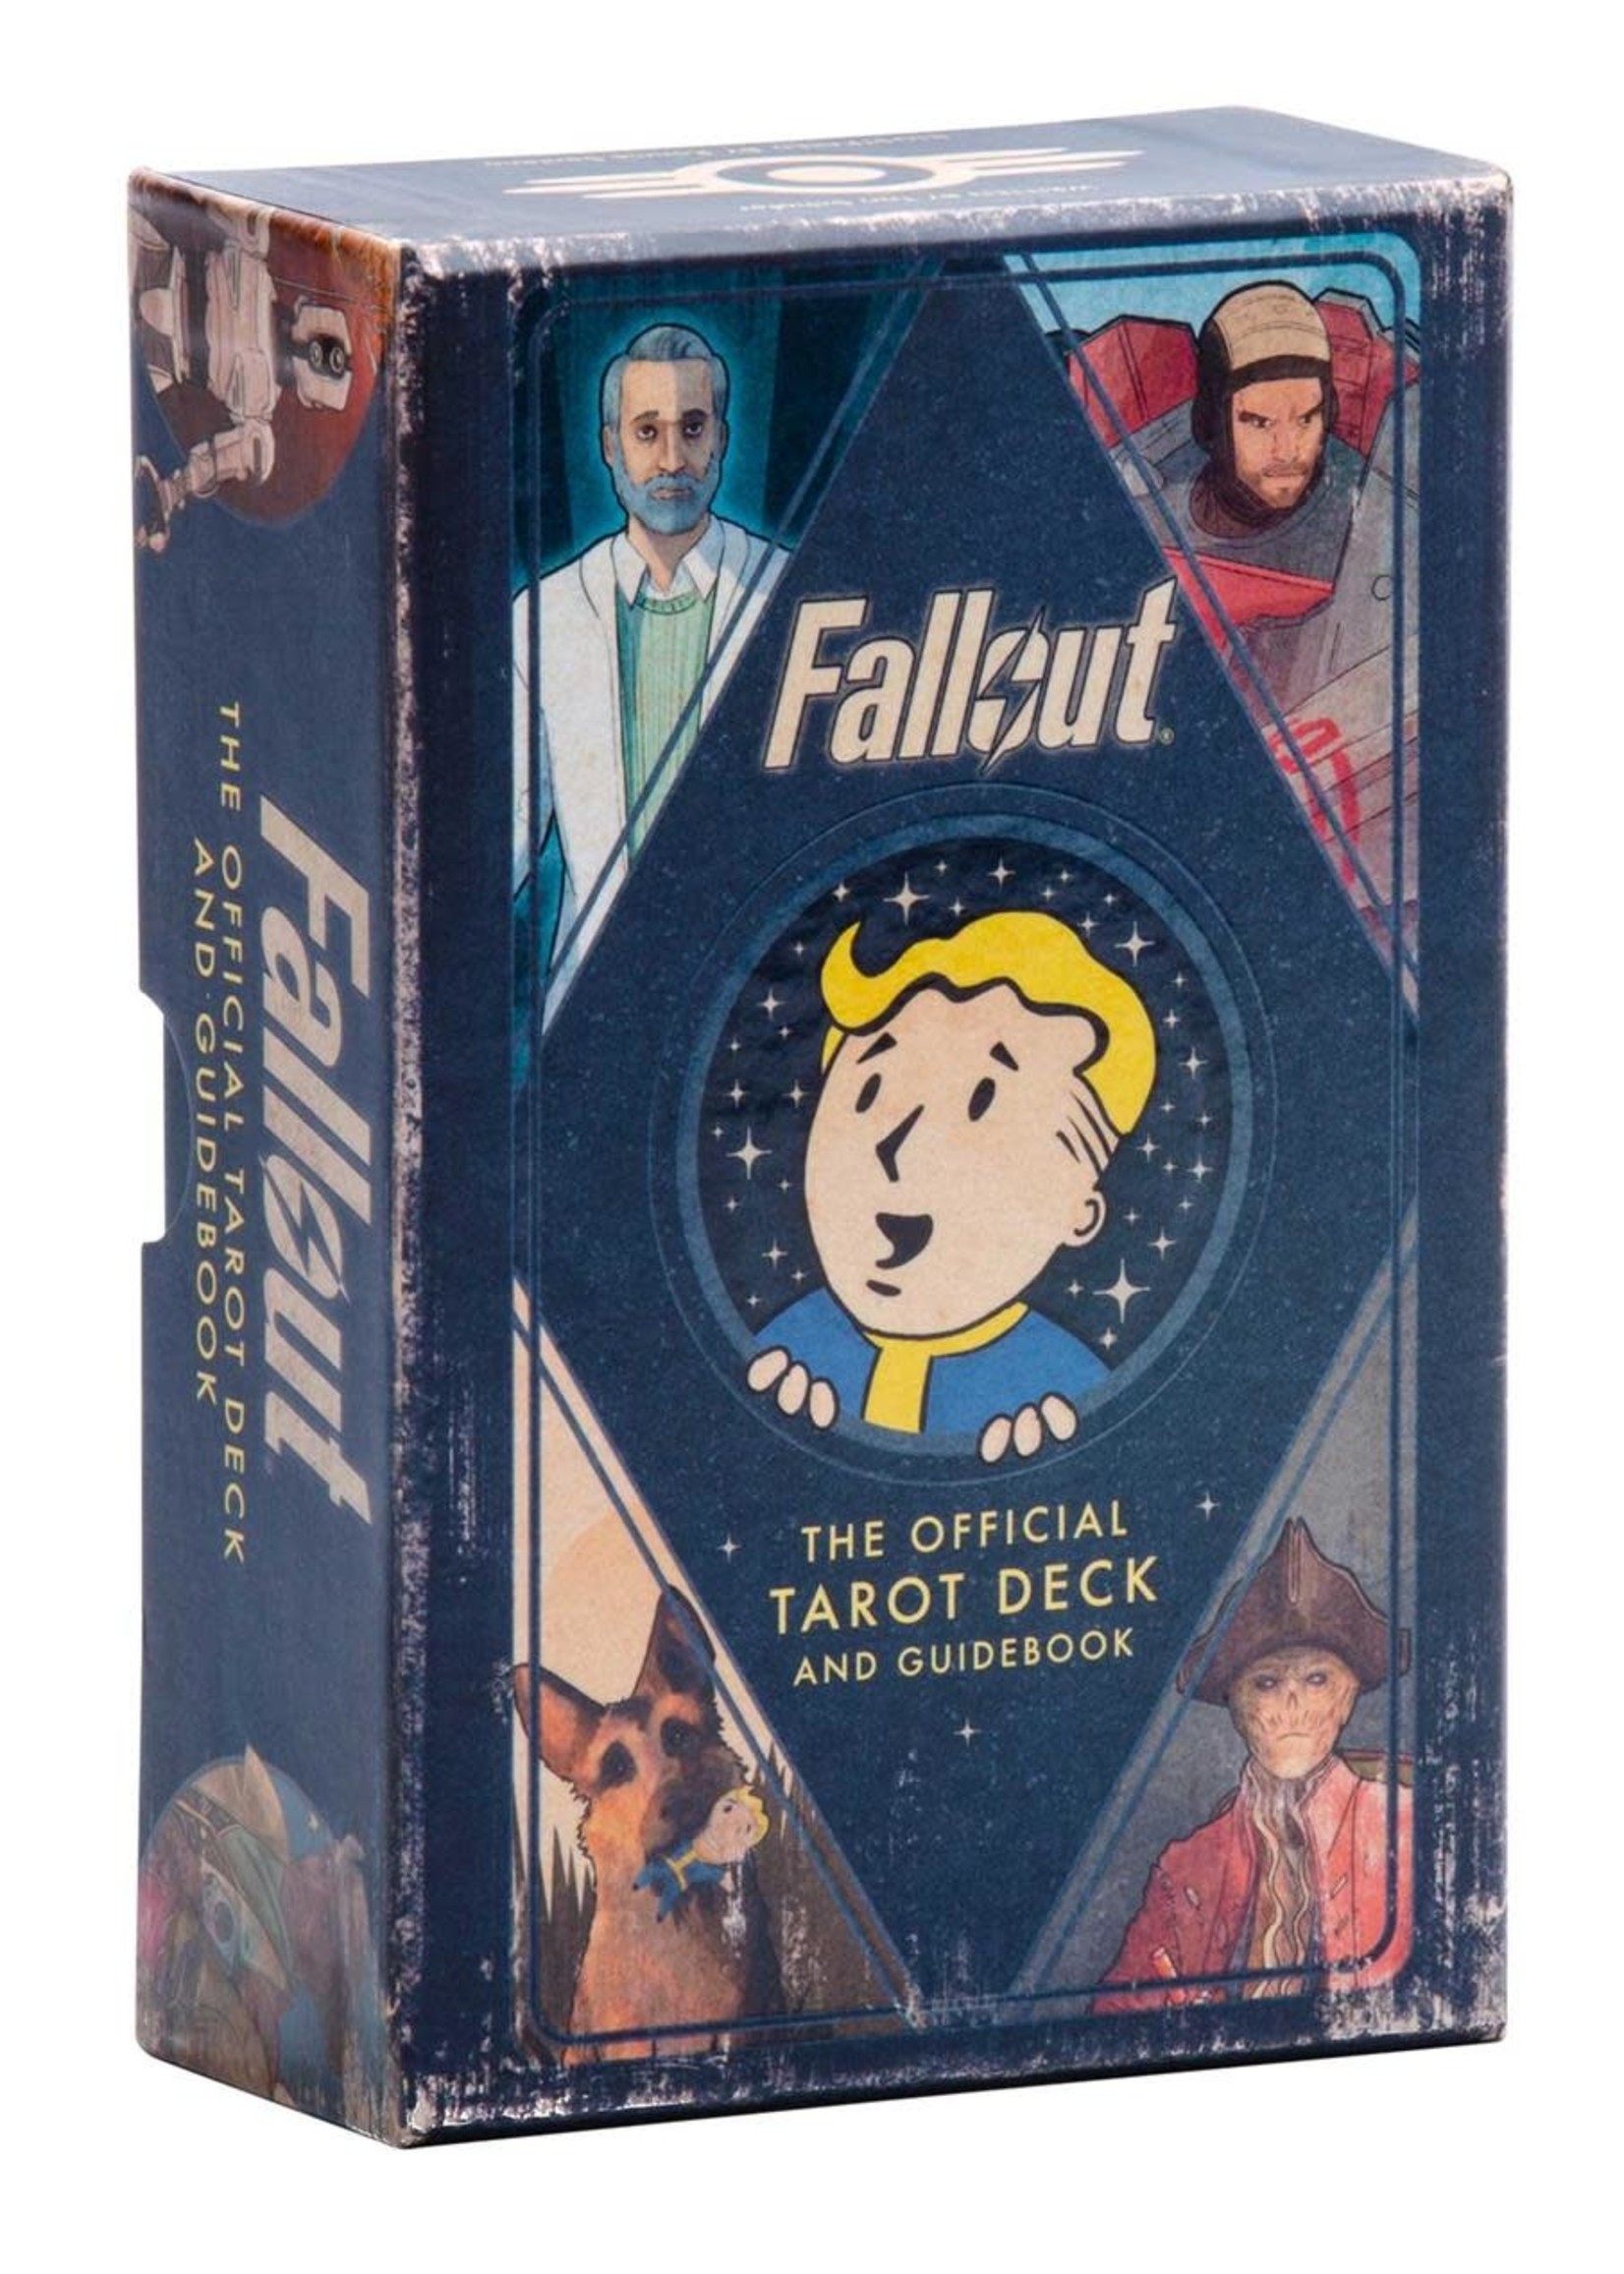 Fallout: The Official Tarot Deck and Guidebook by Insight Editions, Tori Schafer